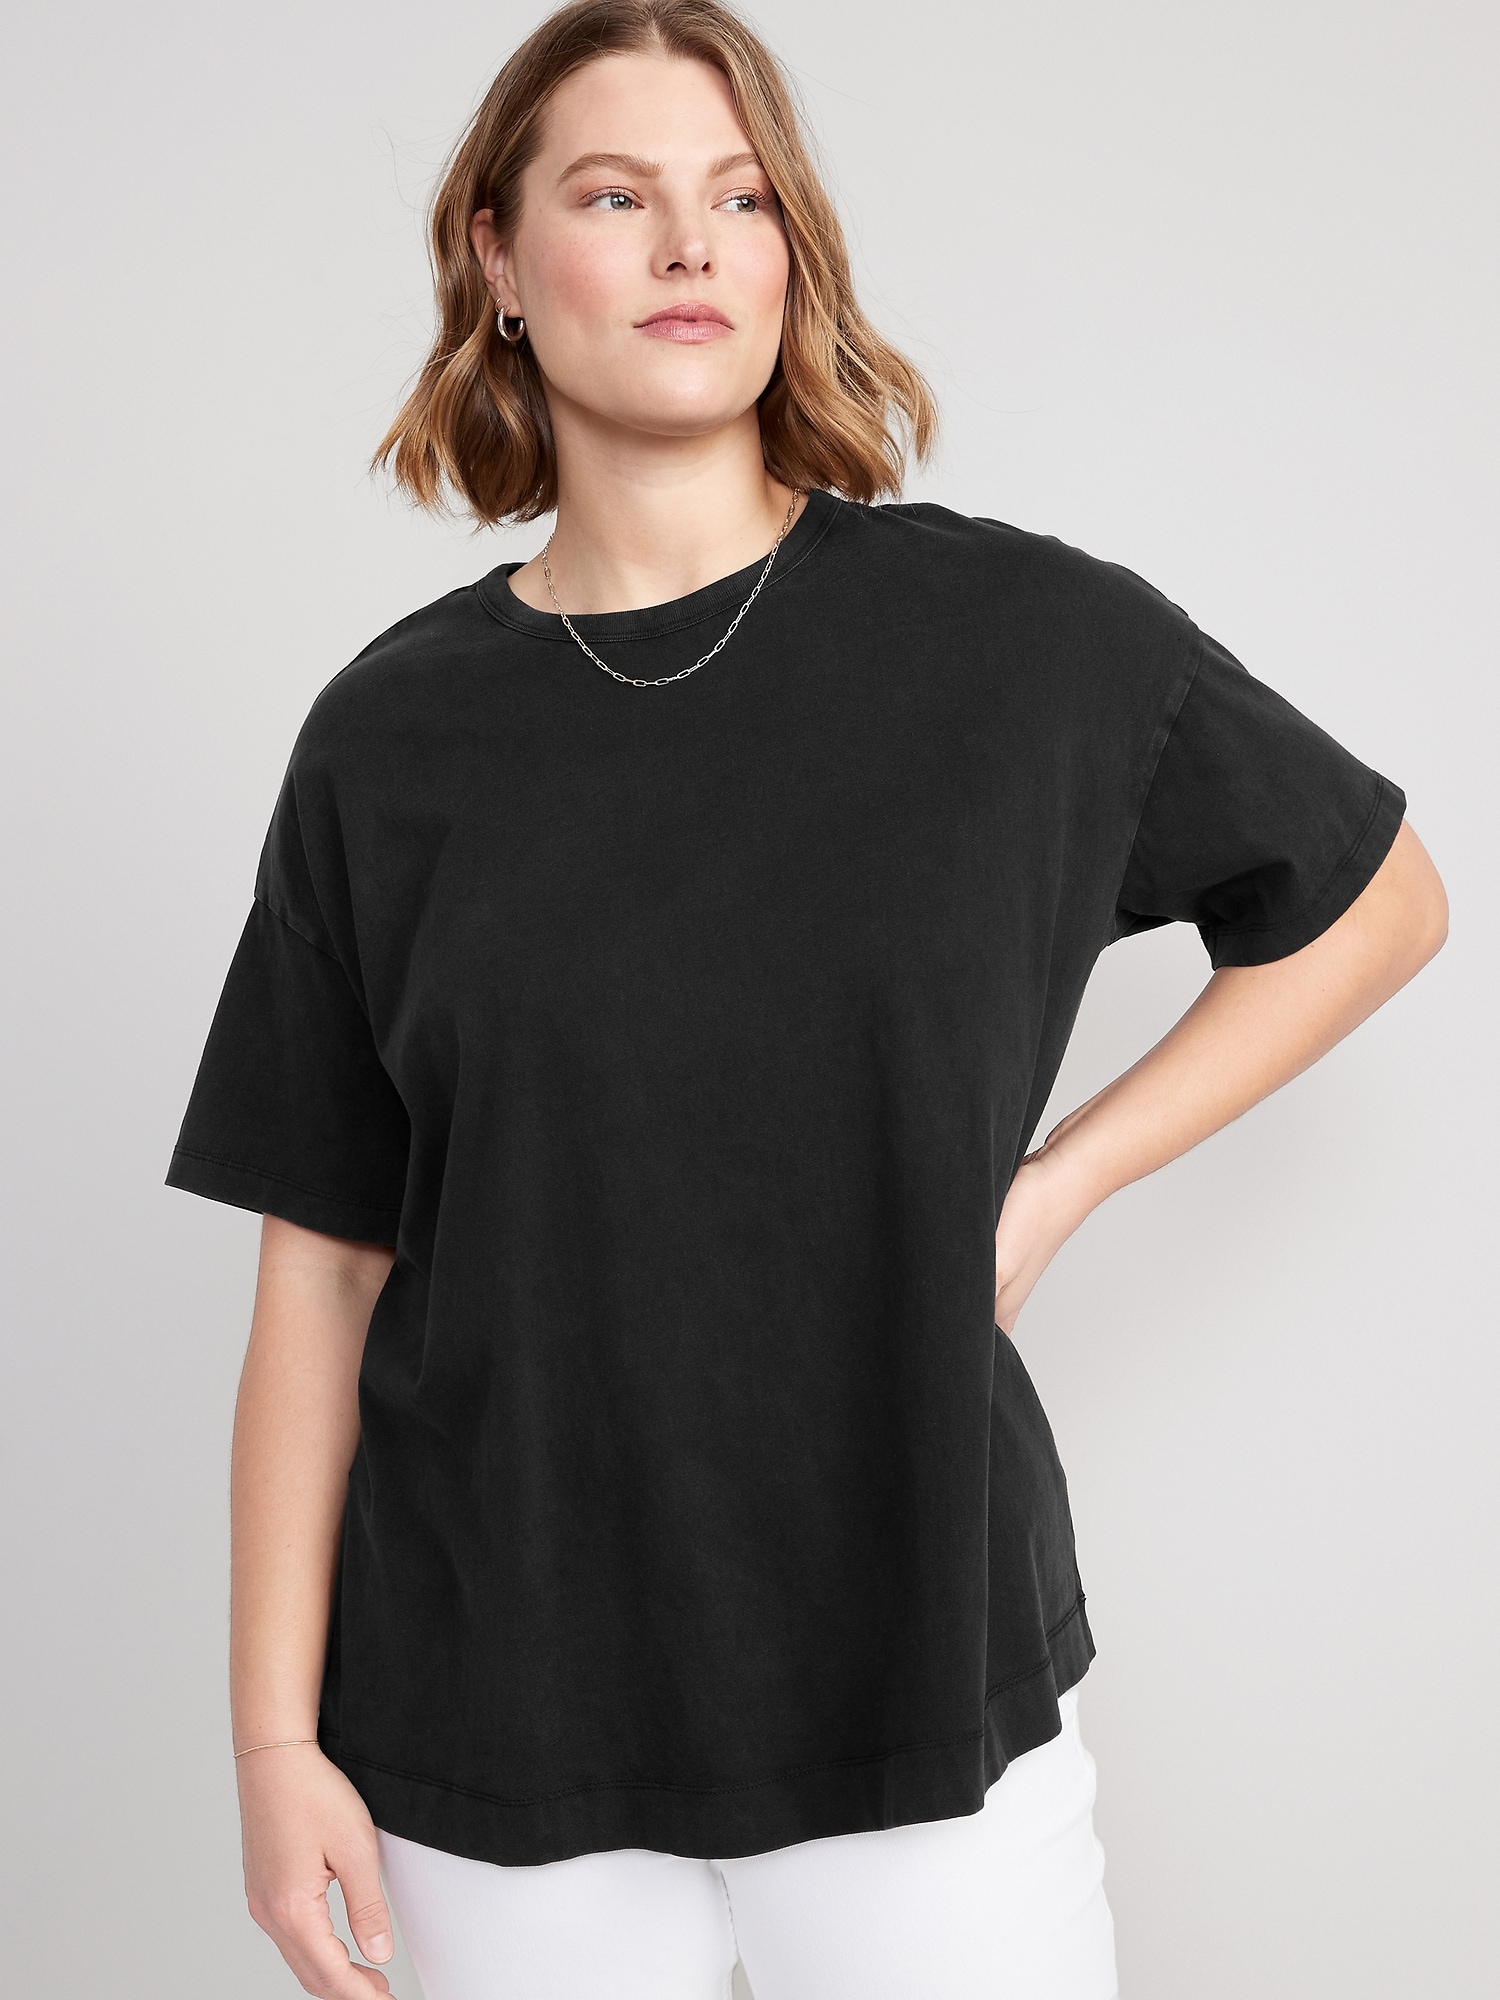 Oversized Vintage Tunic T-Shirt for Women | Old Navy